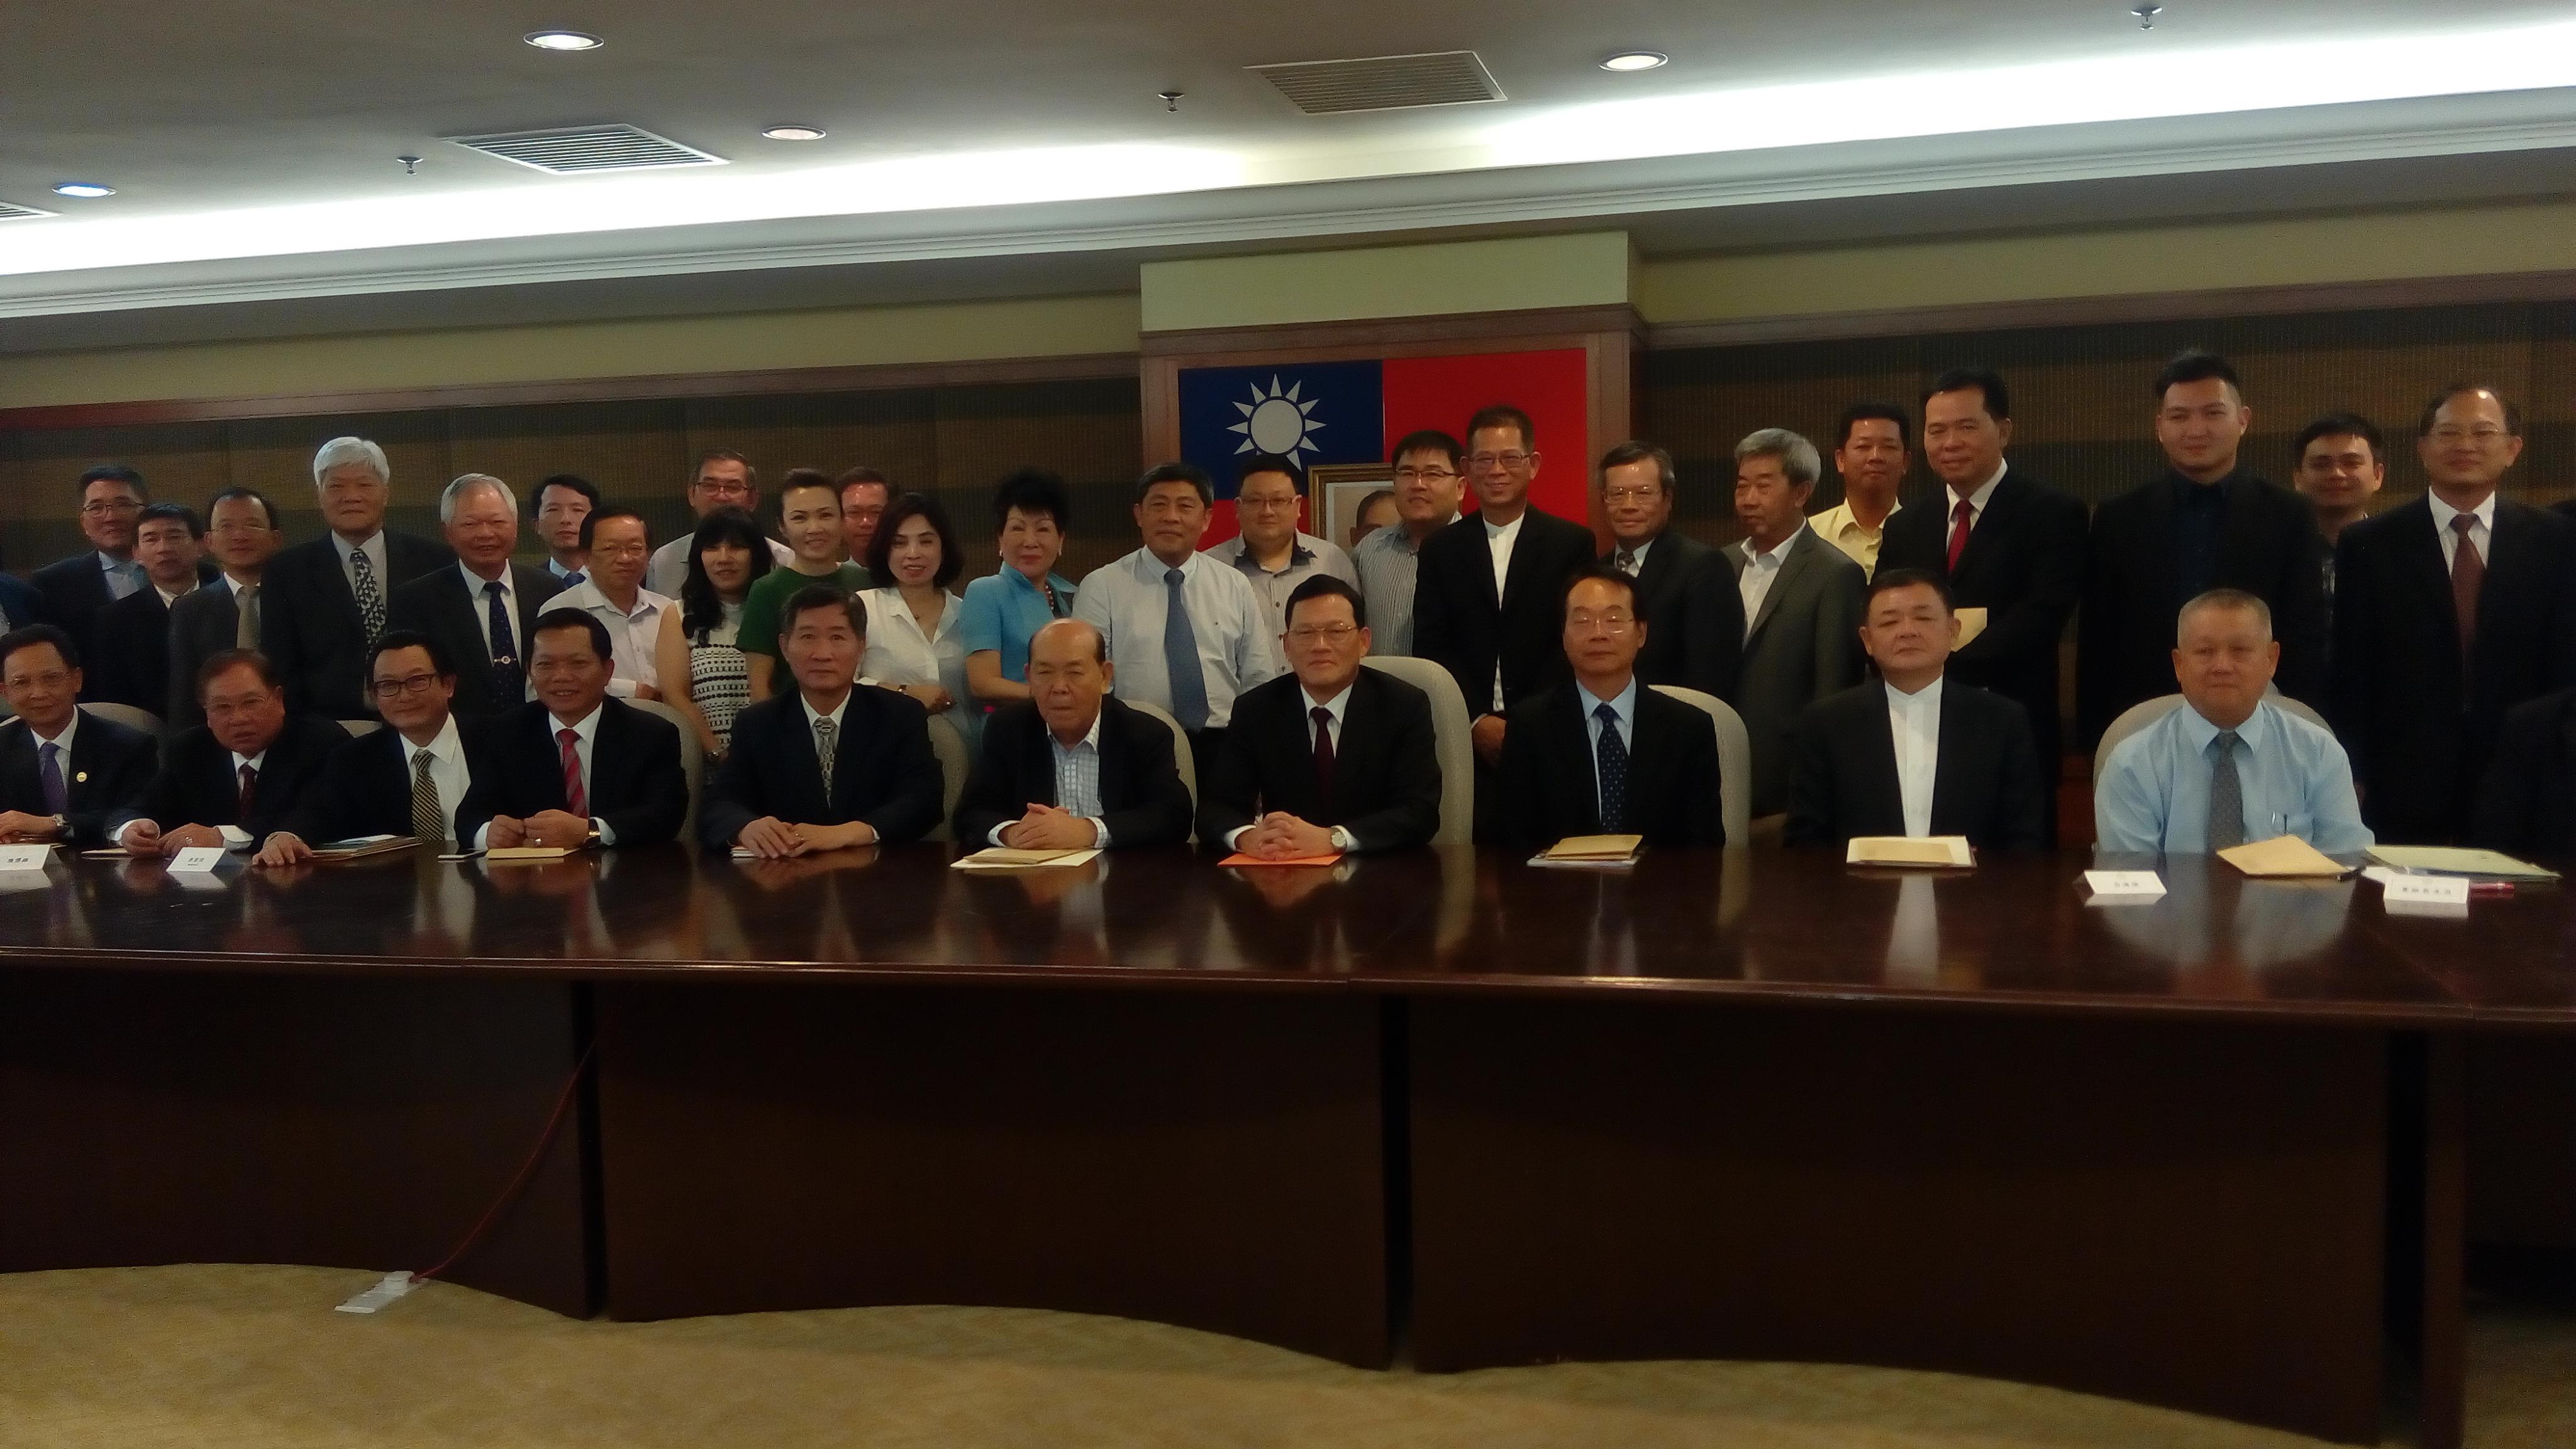 Representative Chang, James Chi- ping(front row from left the fourth)  and representatives of various associations after the meeting take photograph.